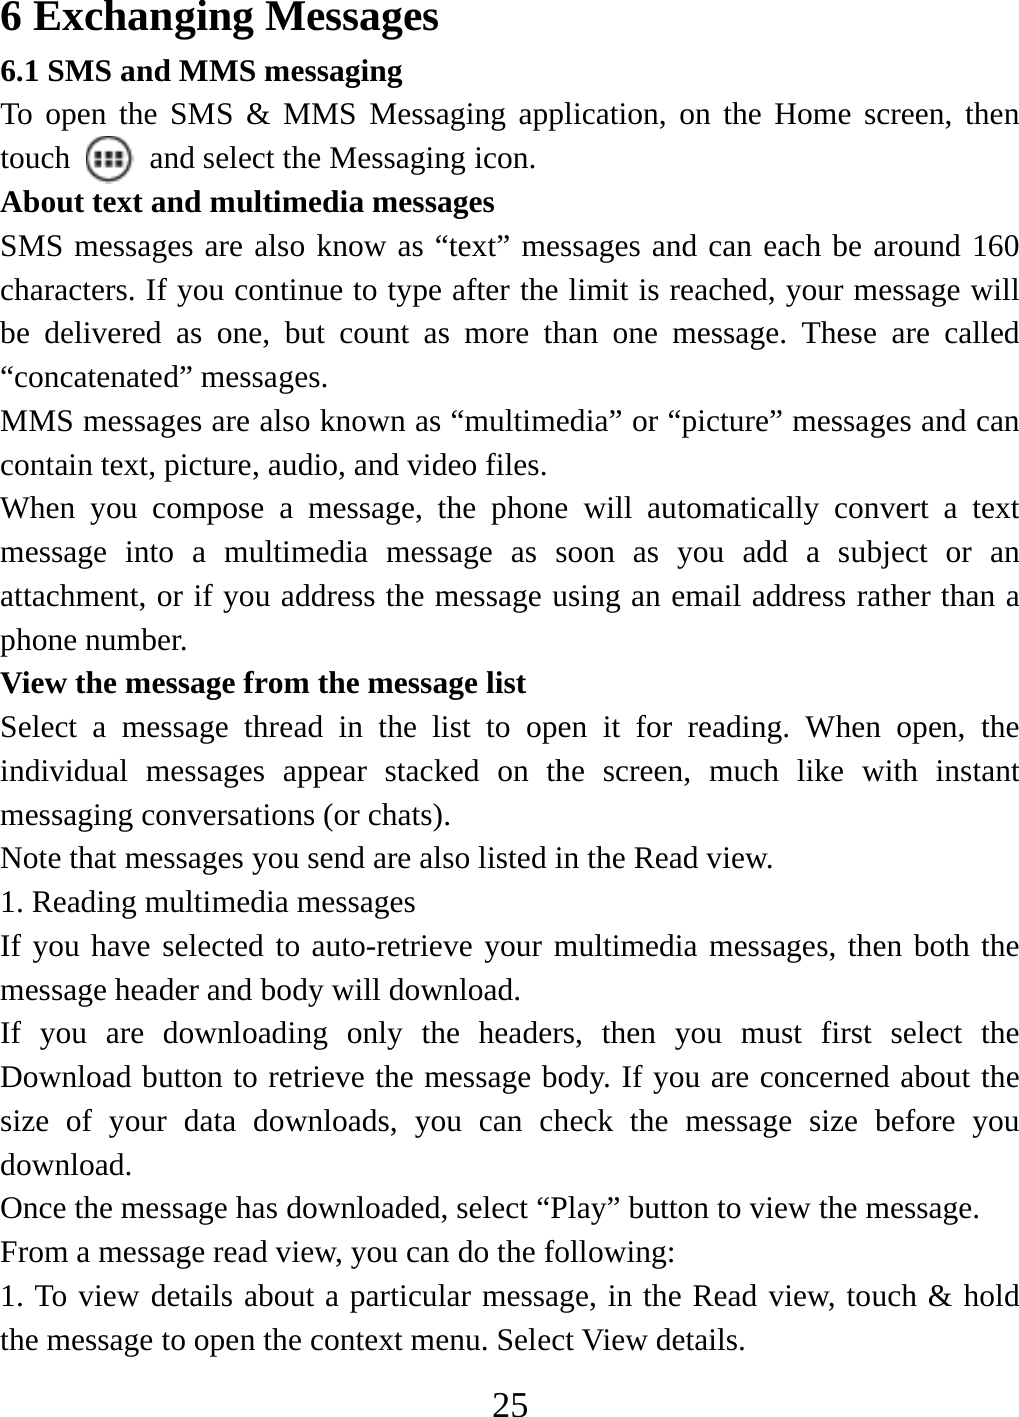   256 Exchanging Messages 6.1 SMS and MMS messaging   To open the SMS &amp; MMS Messaging application, on the Home screen, then touch    and select the Messaging icon.   About text and multimedia messages   SMS messages are also know as “text” messages and can each be around 160 characters. If you continue to type after the limit is reached, your message will be delivered as one, but count as more than one message. These are called “concatenated” messages.   MMS messages are also known as “multimedia” or “picture” messages and can contain text, picture, audio, and video files.   When you compose a message, the phone will automatically convert a text message into a multimedia message as soon as you add a subject or an attachment, or if you address the message using an email address rather than a phone number.   View the message from the message list   Select a message thread in the list to open it for reading. When open, the individual messages appear stacked on the screen, much like with instant messaging conversations (or chats).   Note that messages you send are also listed in the Read view.   1. Reading multimedia messages   If you have selected to auto-retrieve your multimedia messages, then both the message header and body will download. If you are downloading only the headers, then you must first select the Download button to retrieve the message body. If you are concerned about the size of your data downloads, you can check the message size before you download.  Once the message has downloaded, select “Play” button to view the message.   From a message read view, you can do the following:   1. To view details about a particular message, in the Read view, touch &amp; hold the message to open the context menu. Select View details.   